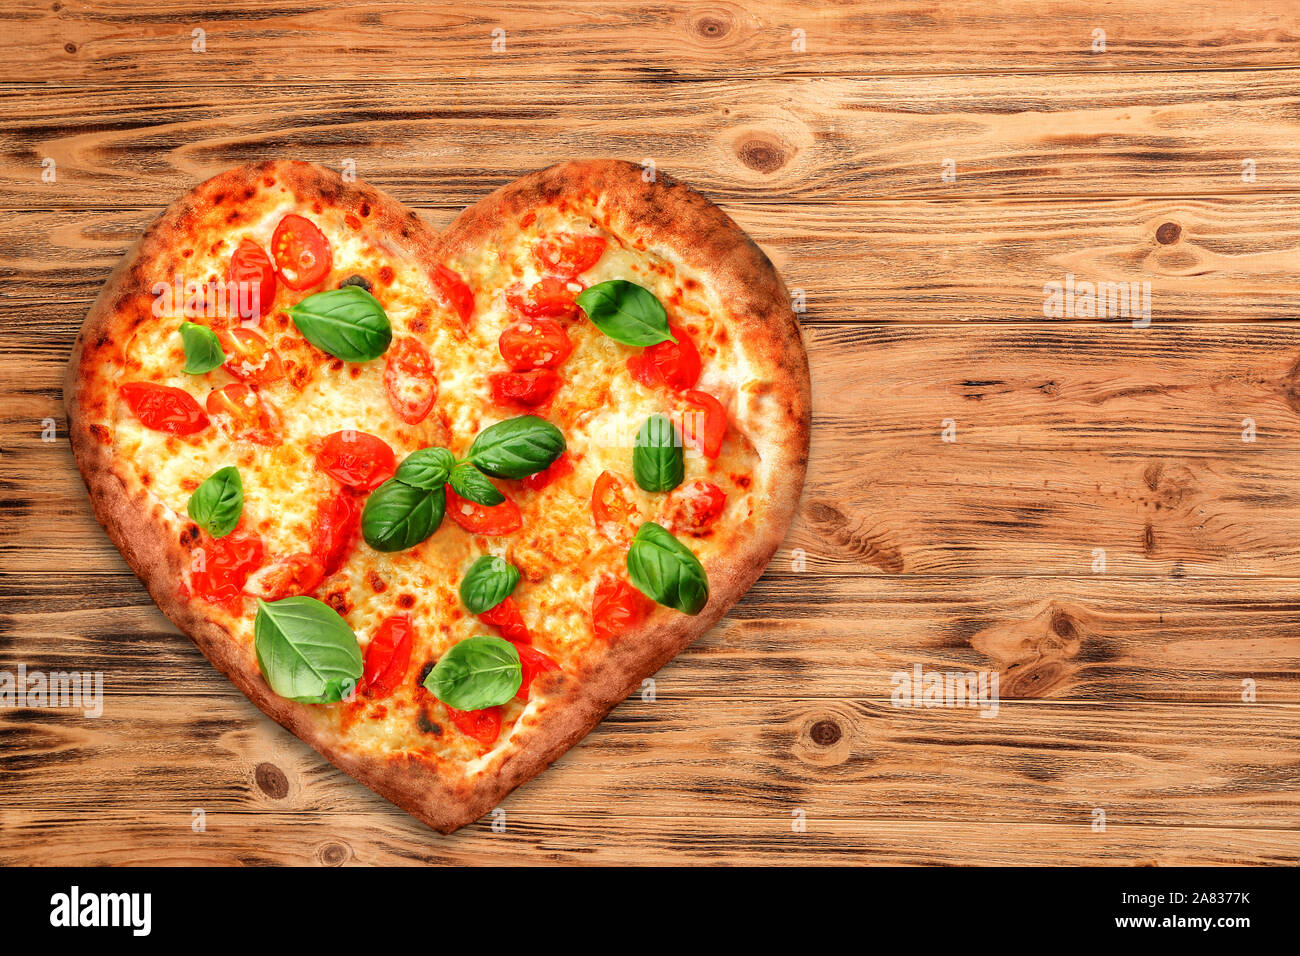 Tasty heart-shaped pizza on wooden background Stock Photo